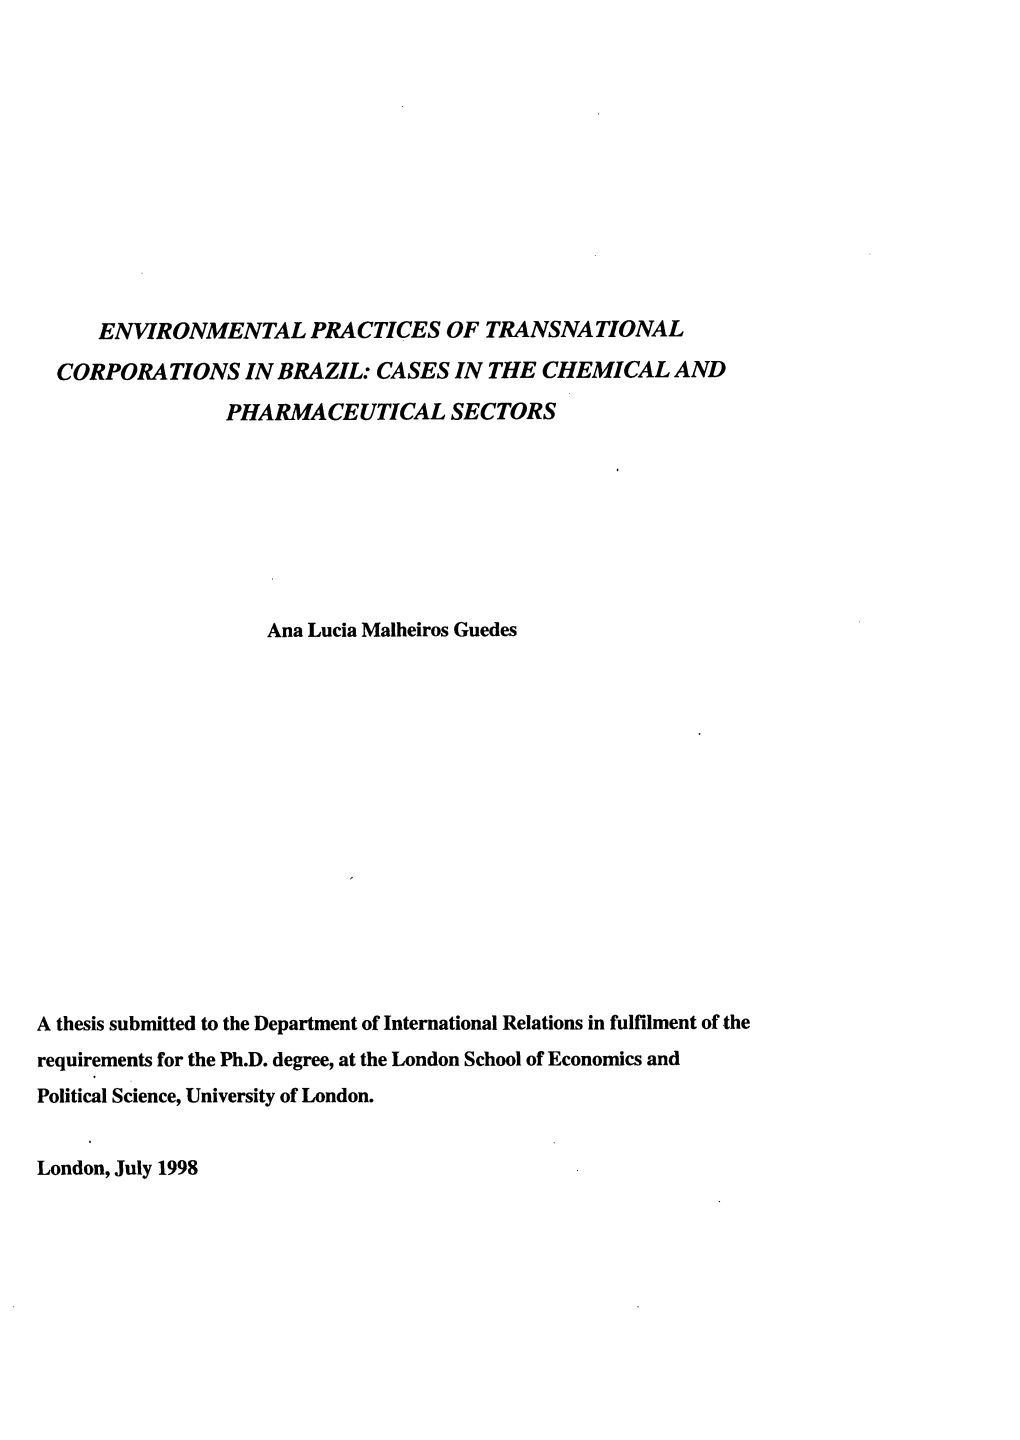 Environmental Practices of Transnational Corporations in Brazil: Cases in the Chemical and Pharmaceutical Sectors